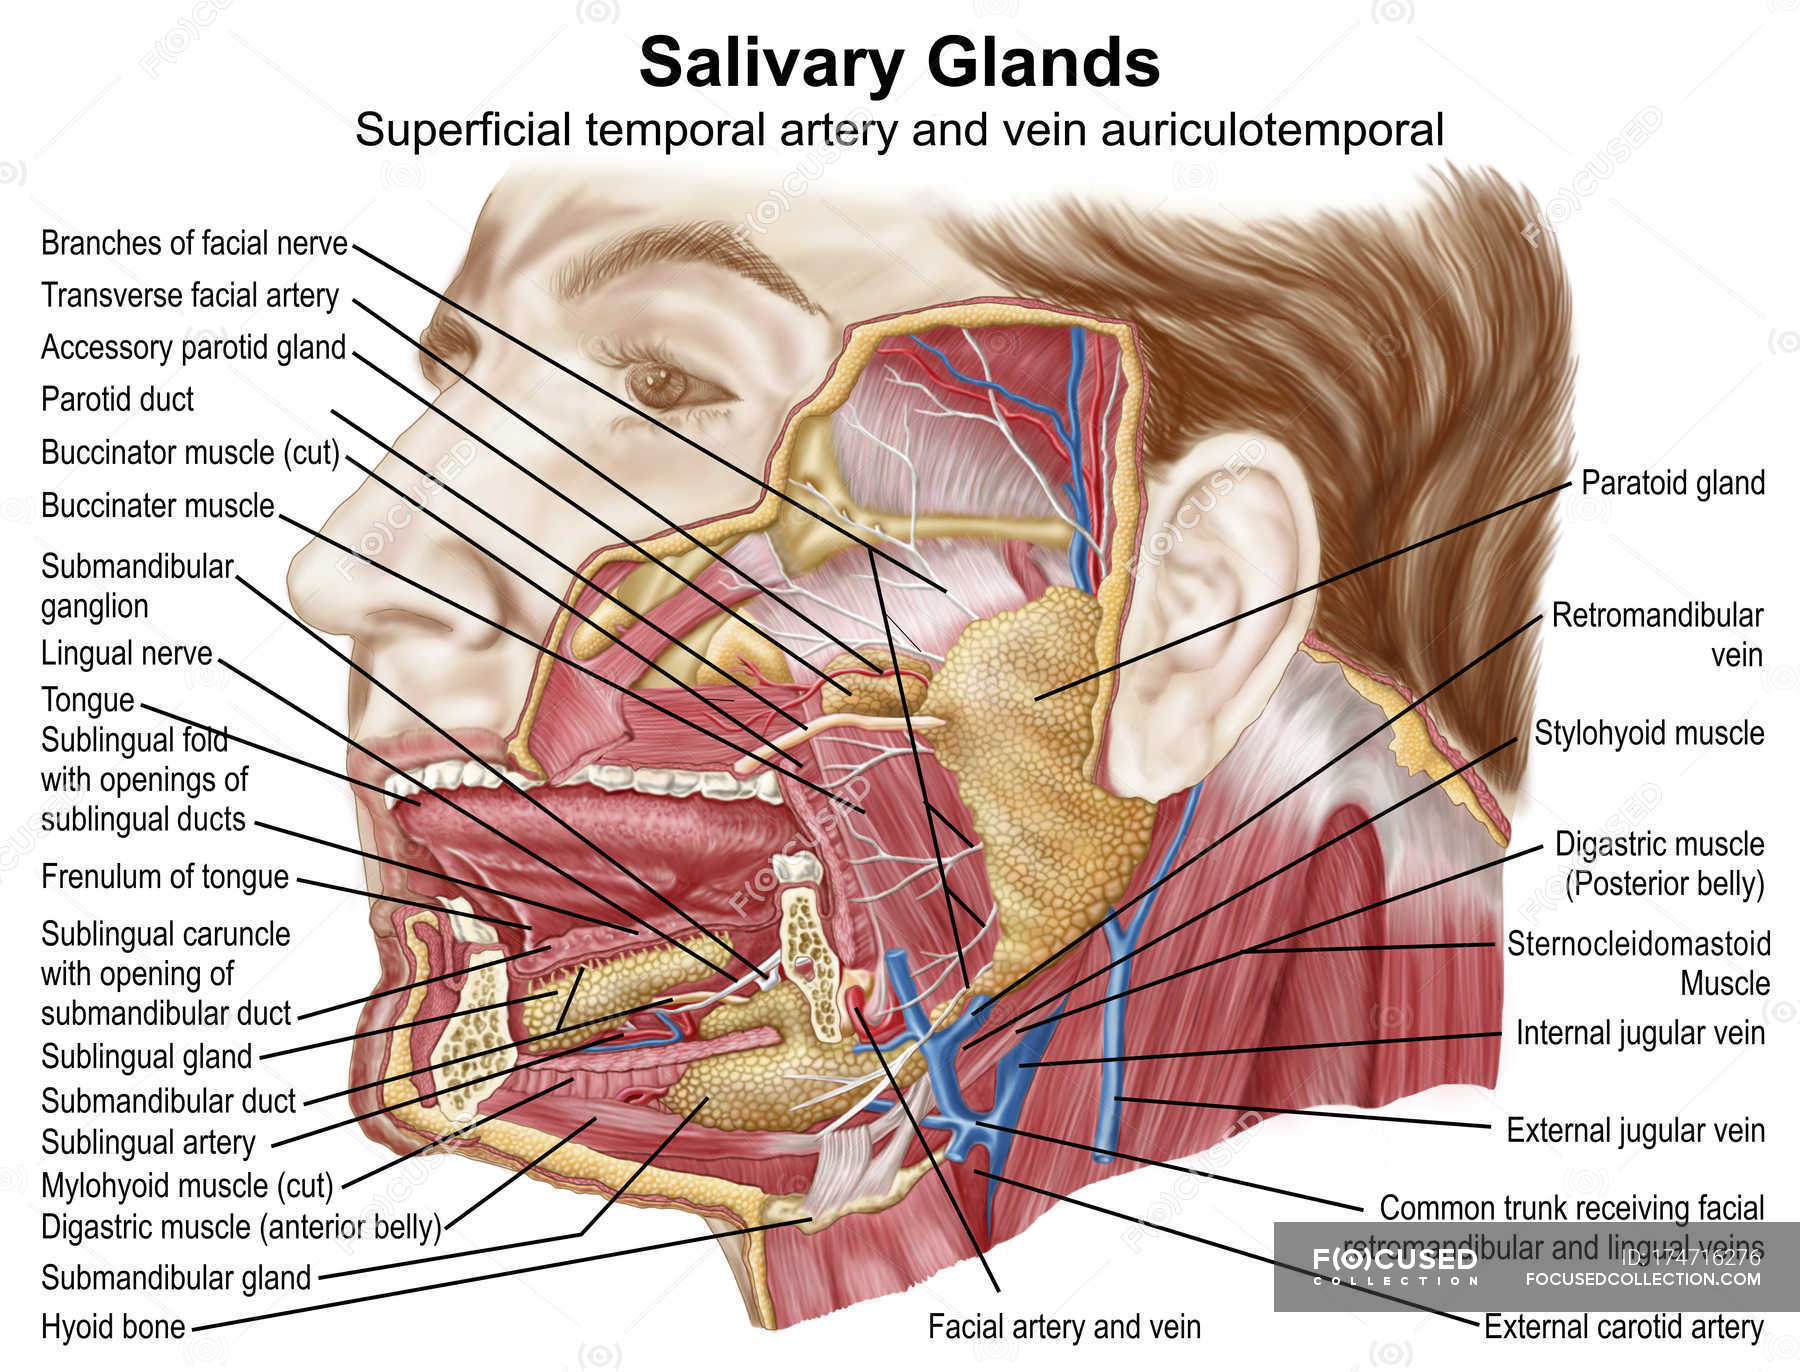 Anatomy of human salivary glands with labels — Stock Photo | #174716276